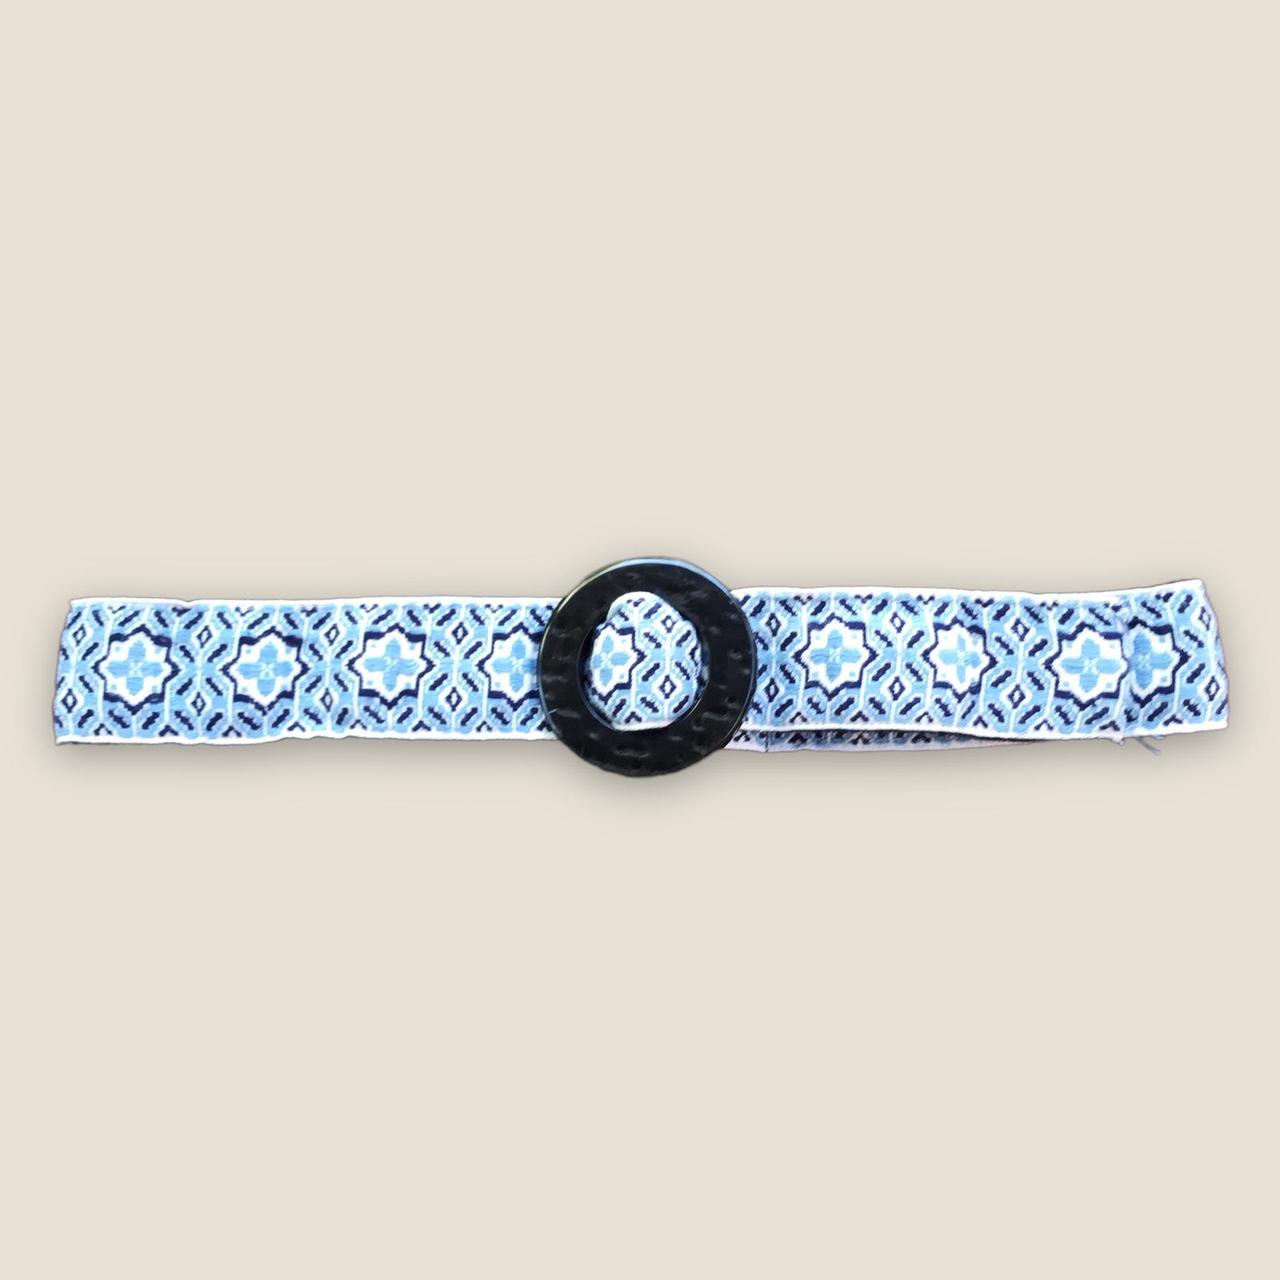 American Vintage Women's Blue and White Belt